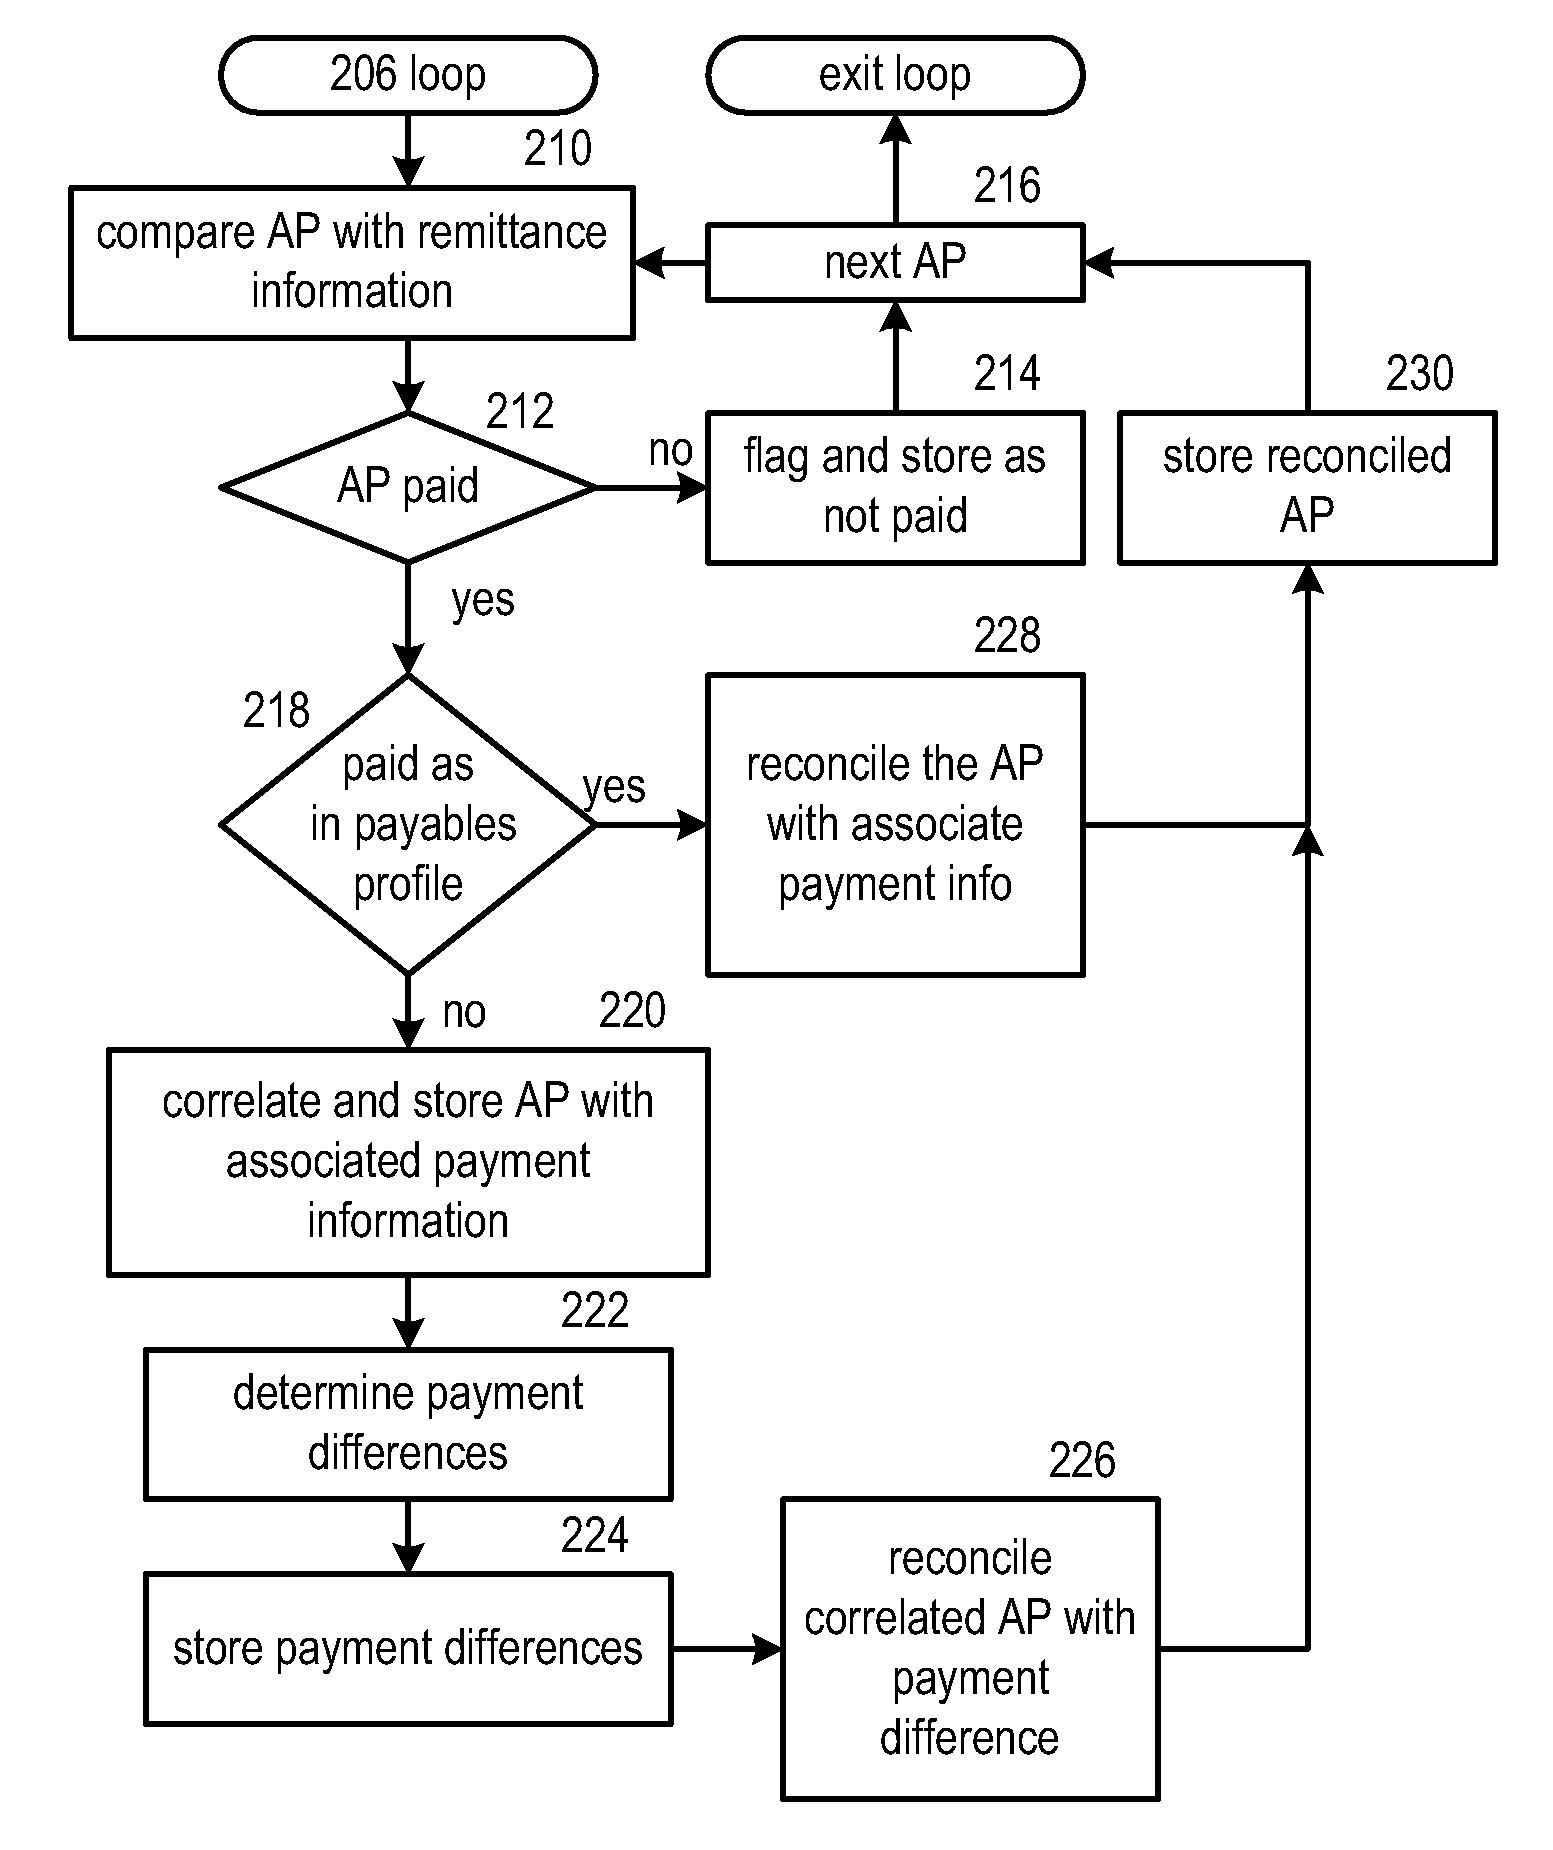 Payment entity device reconciliation for multiple payment methods